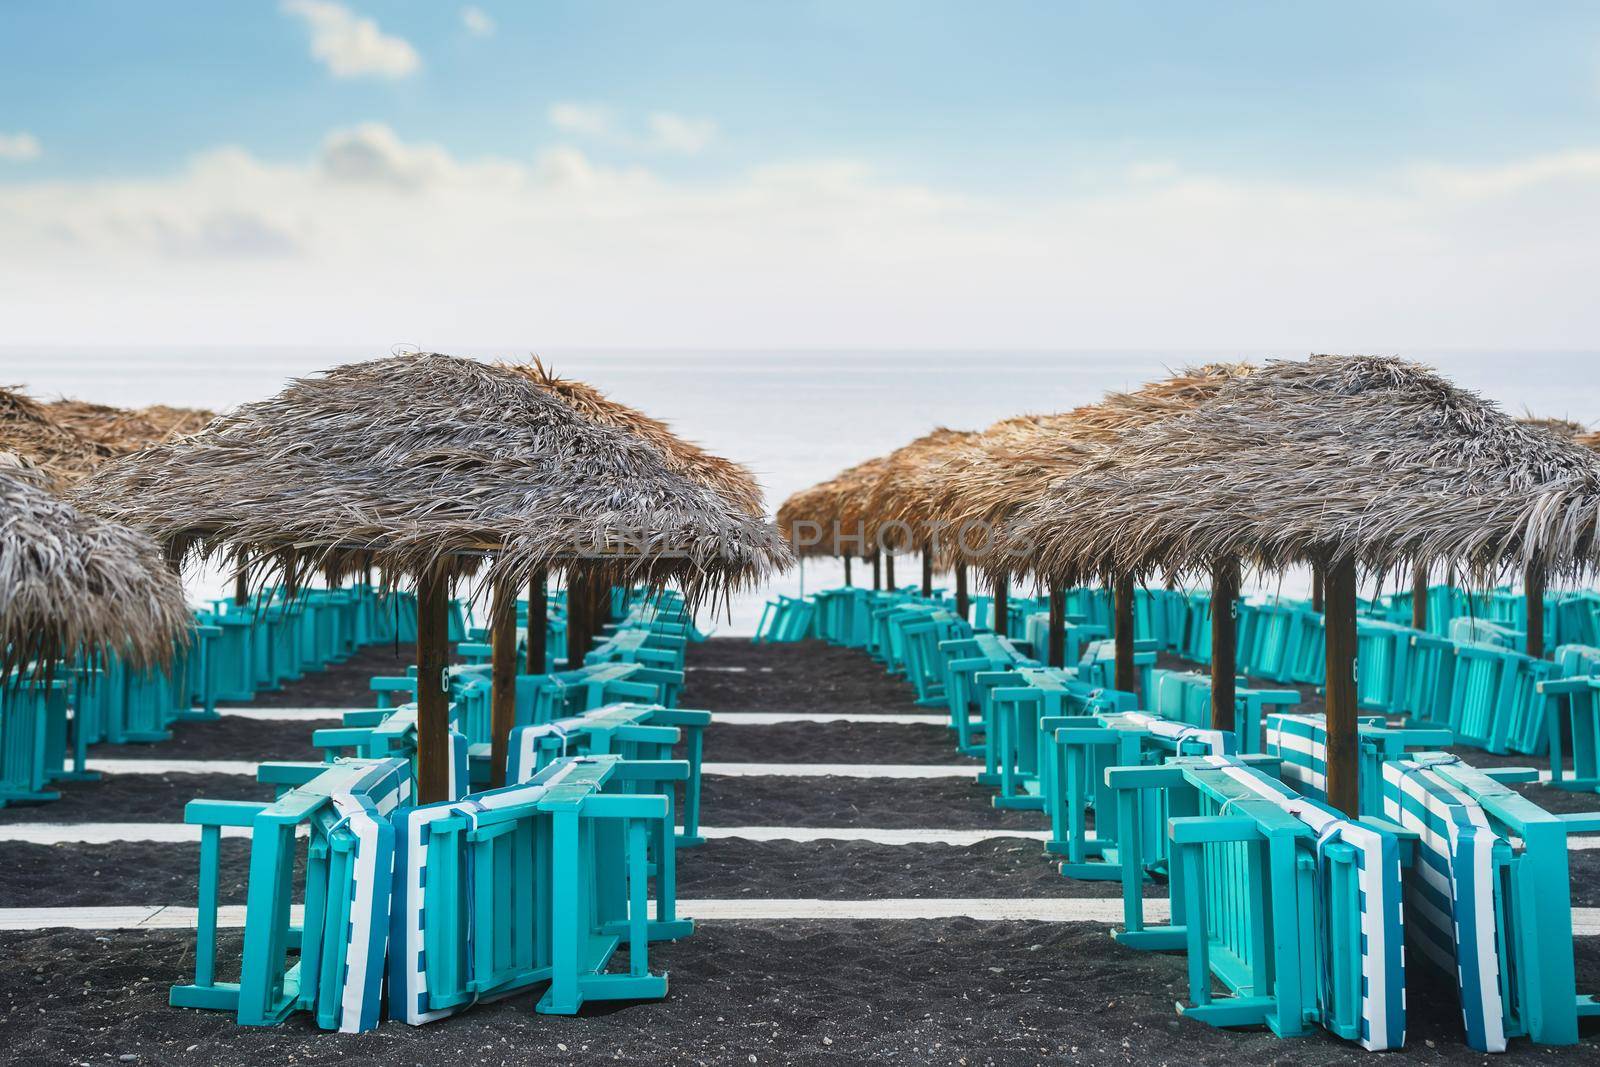 Perissa Black Sand Beach, Santorini, Greece in the morning. Beachside thatched umbrella and beach beds with a sea view by Slast20